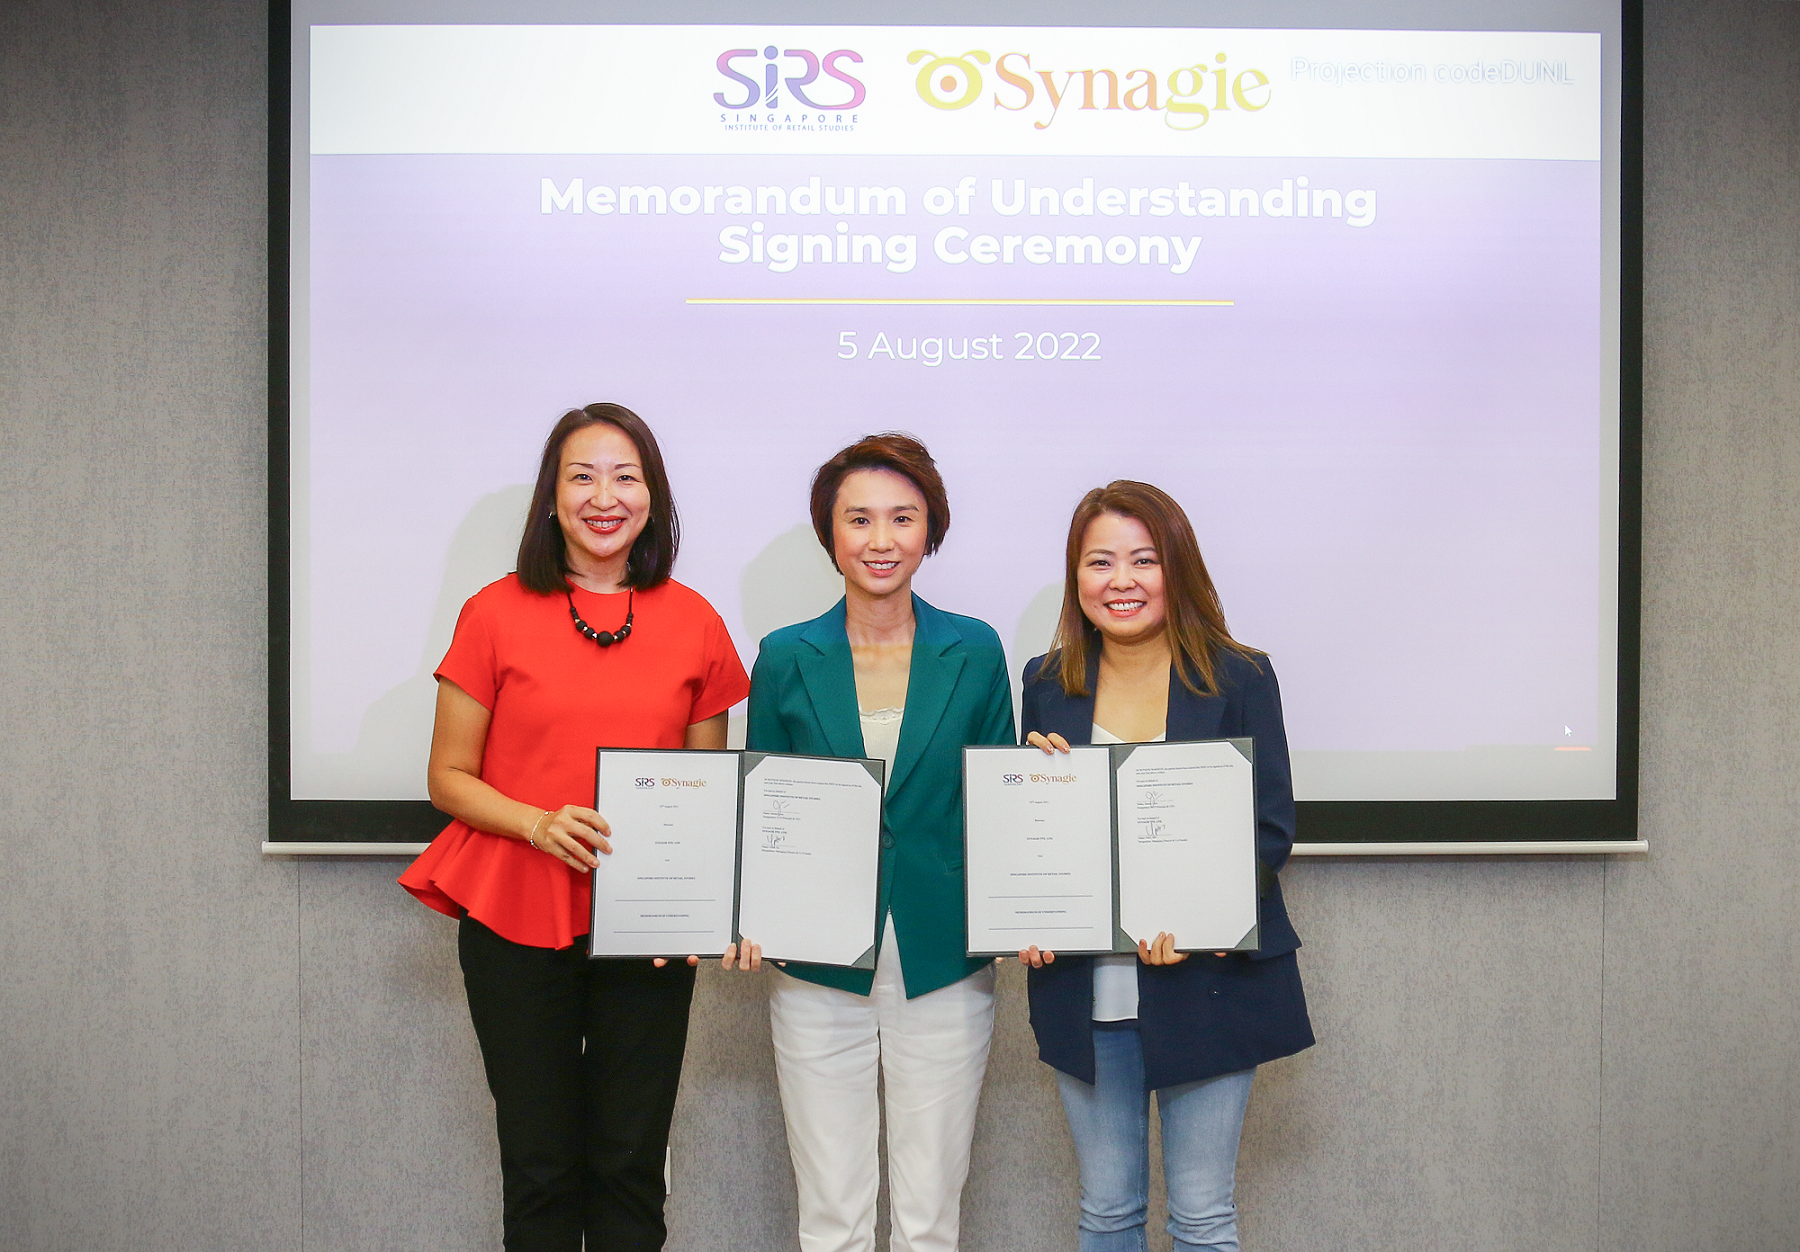 Witnessed by MOS (MCCY & MTI) Low Yen Ling, NYP-SIRS and Synagie signed an MOU to co-develop and roll out a digital commerce talent training and placement programme to boost European-focused eCommerce career opportunities for Singapore-based workers.